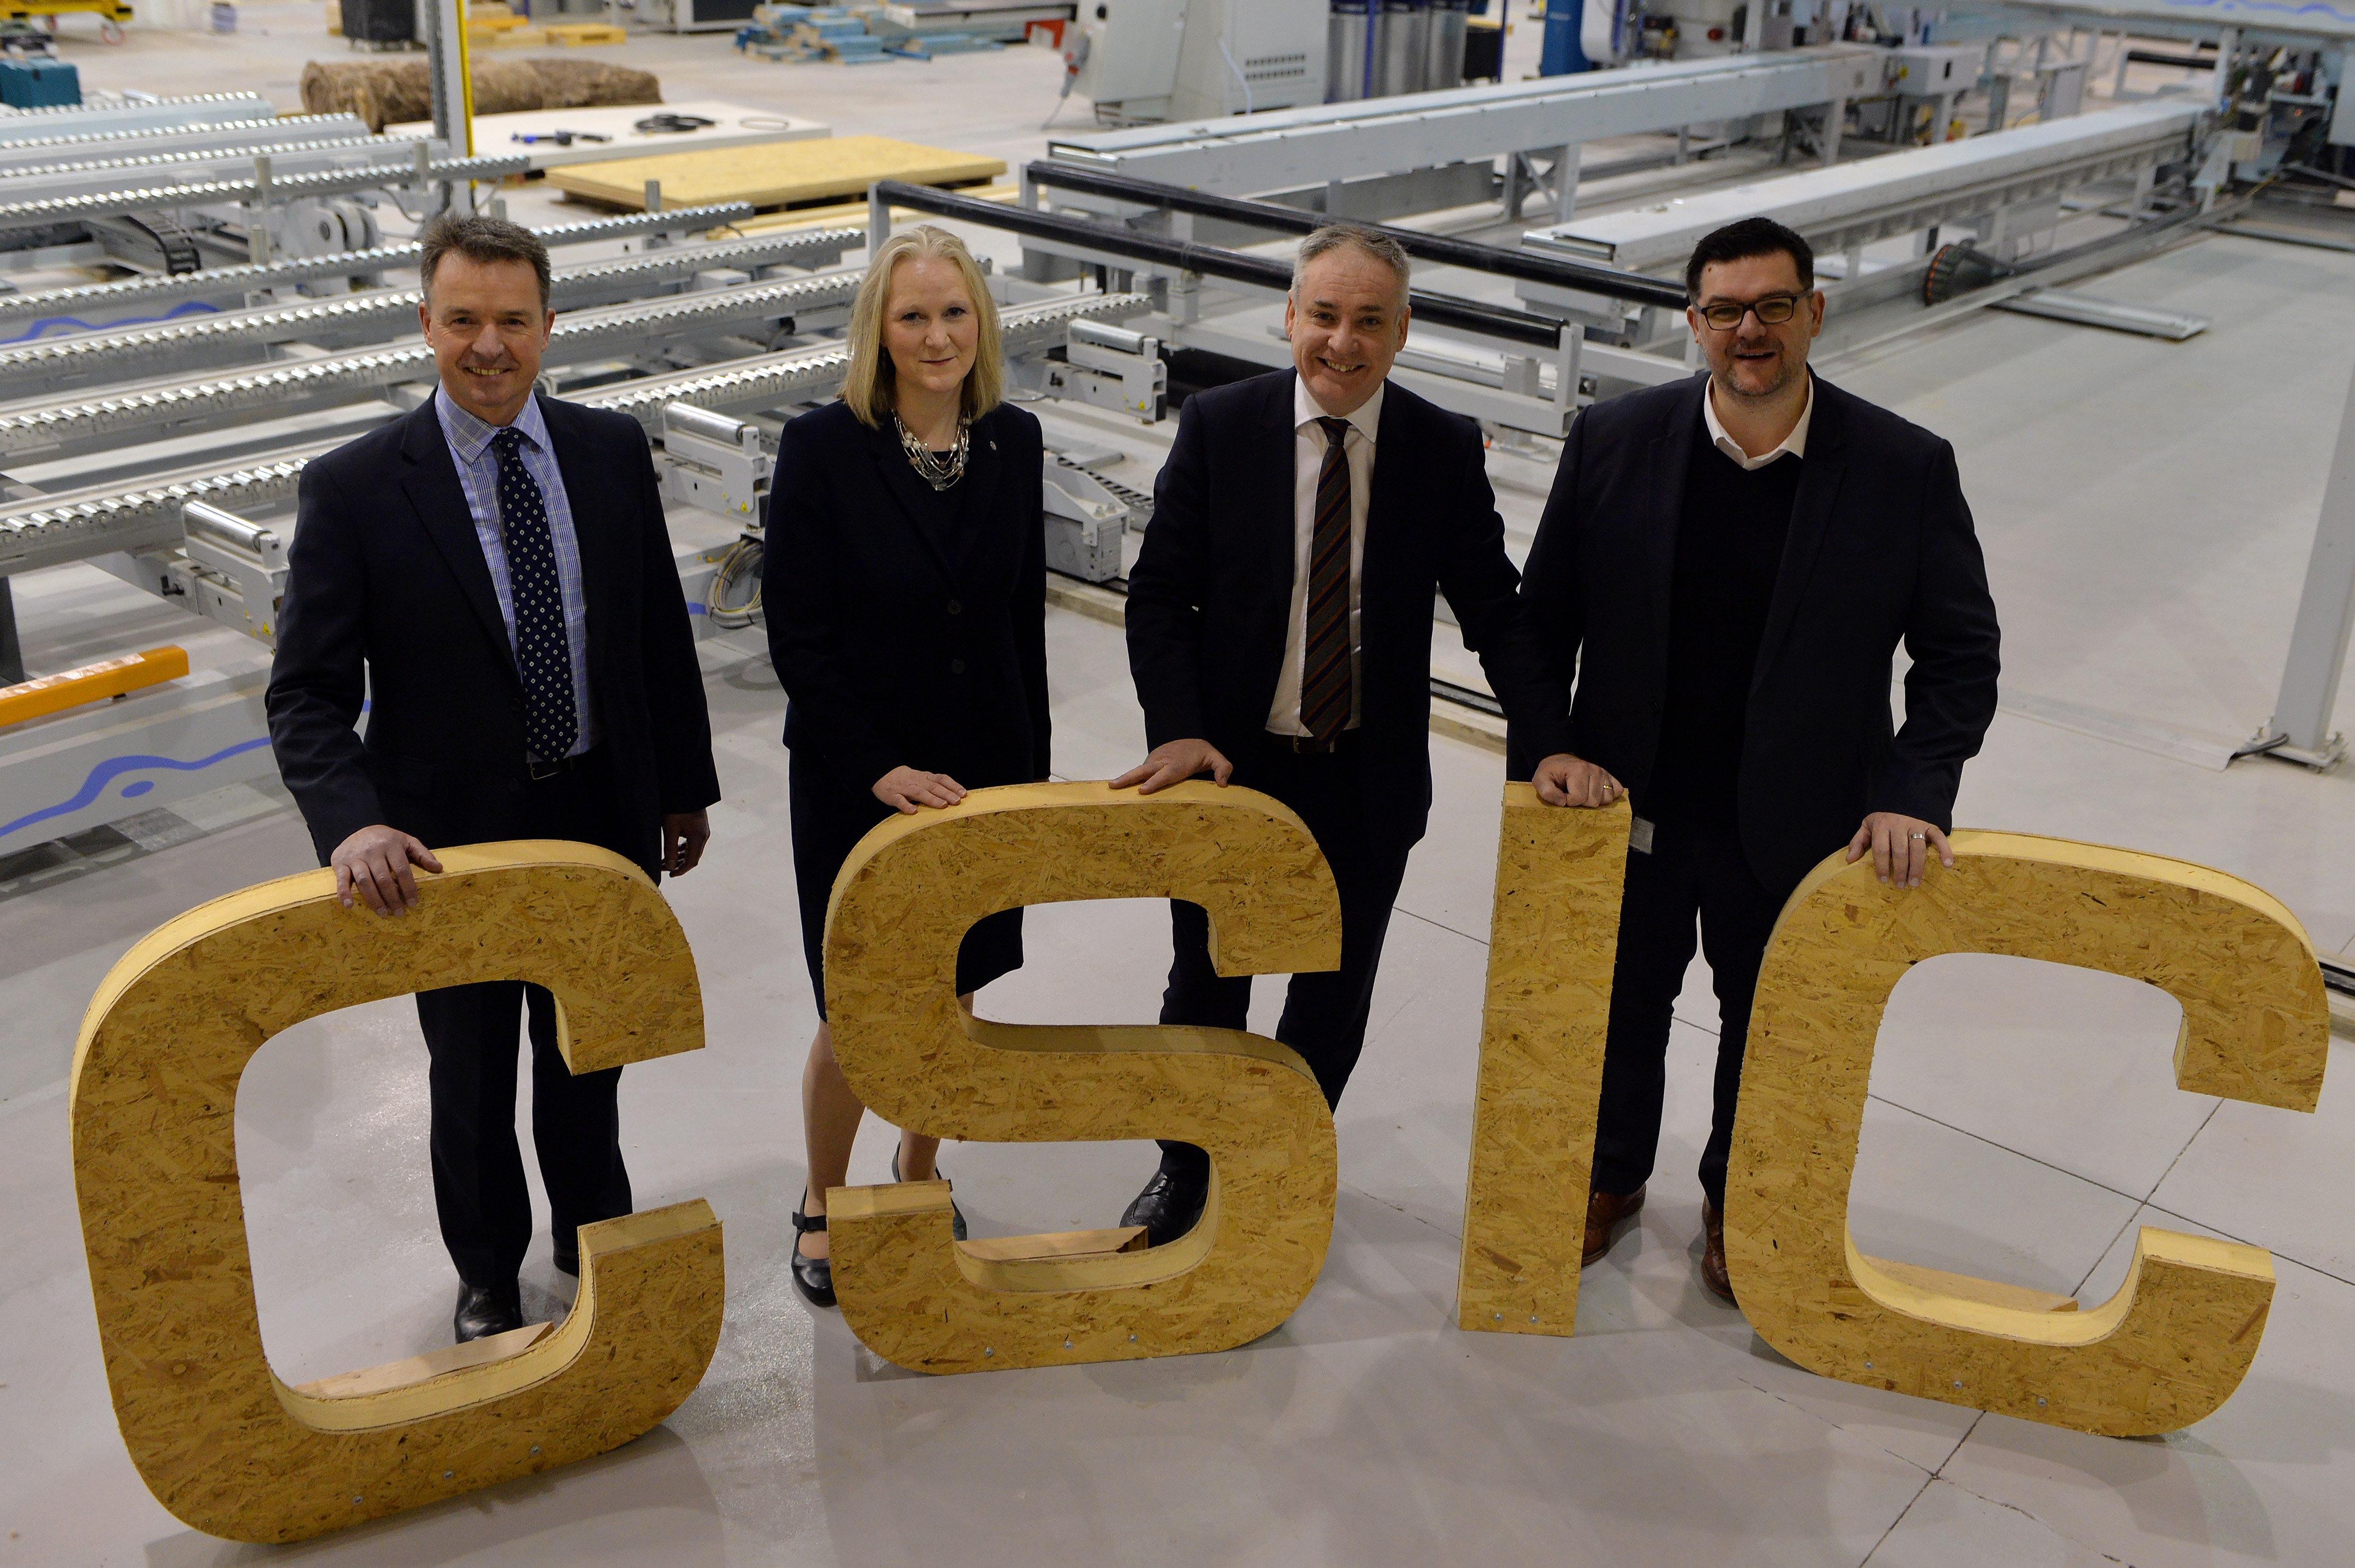 CSIC gains £11m funding boost to support ‘innovation revolution’ in Scottish construction sector